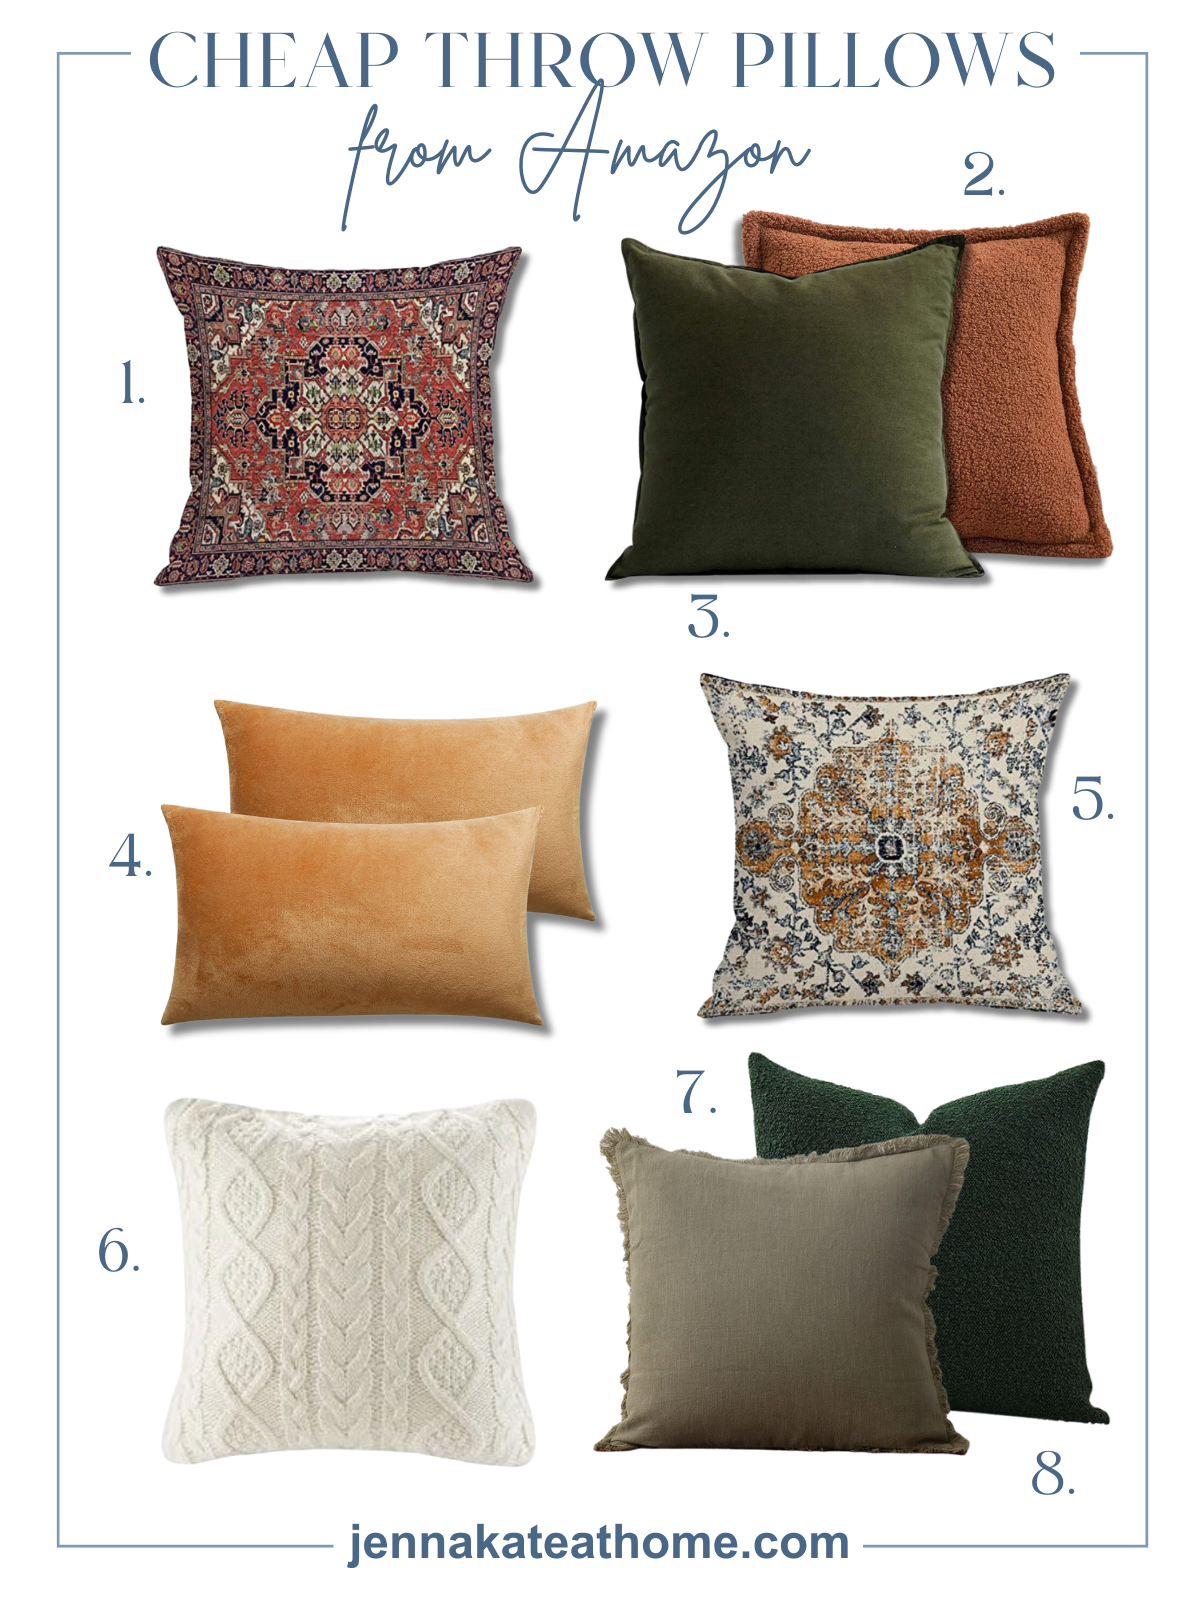 a collage of my favorite Amazon throw pillows for fall